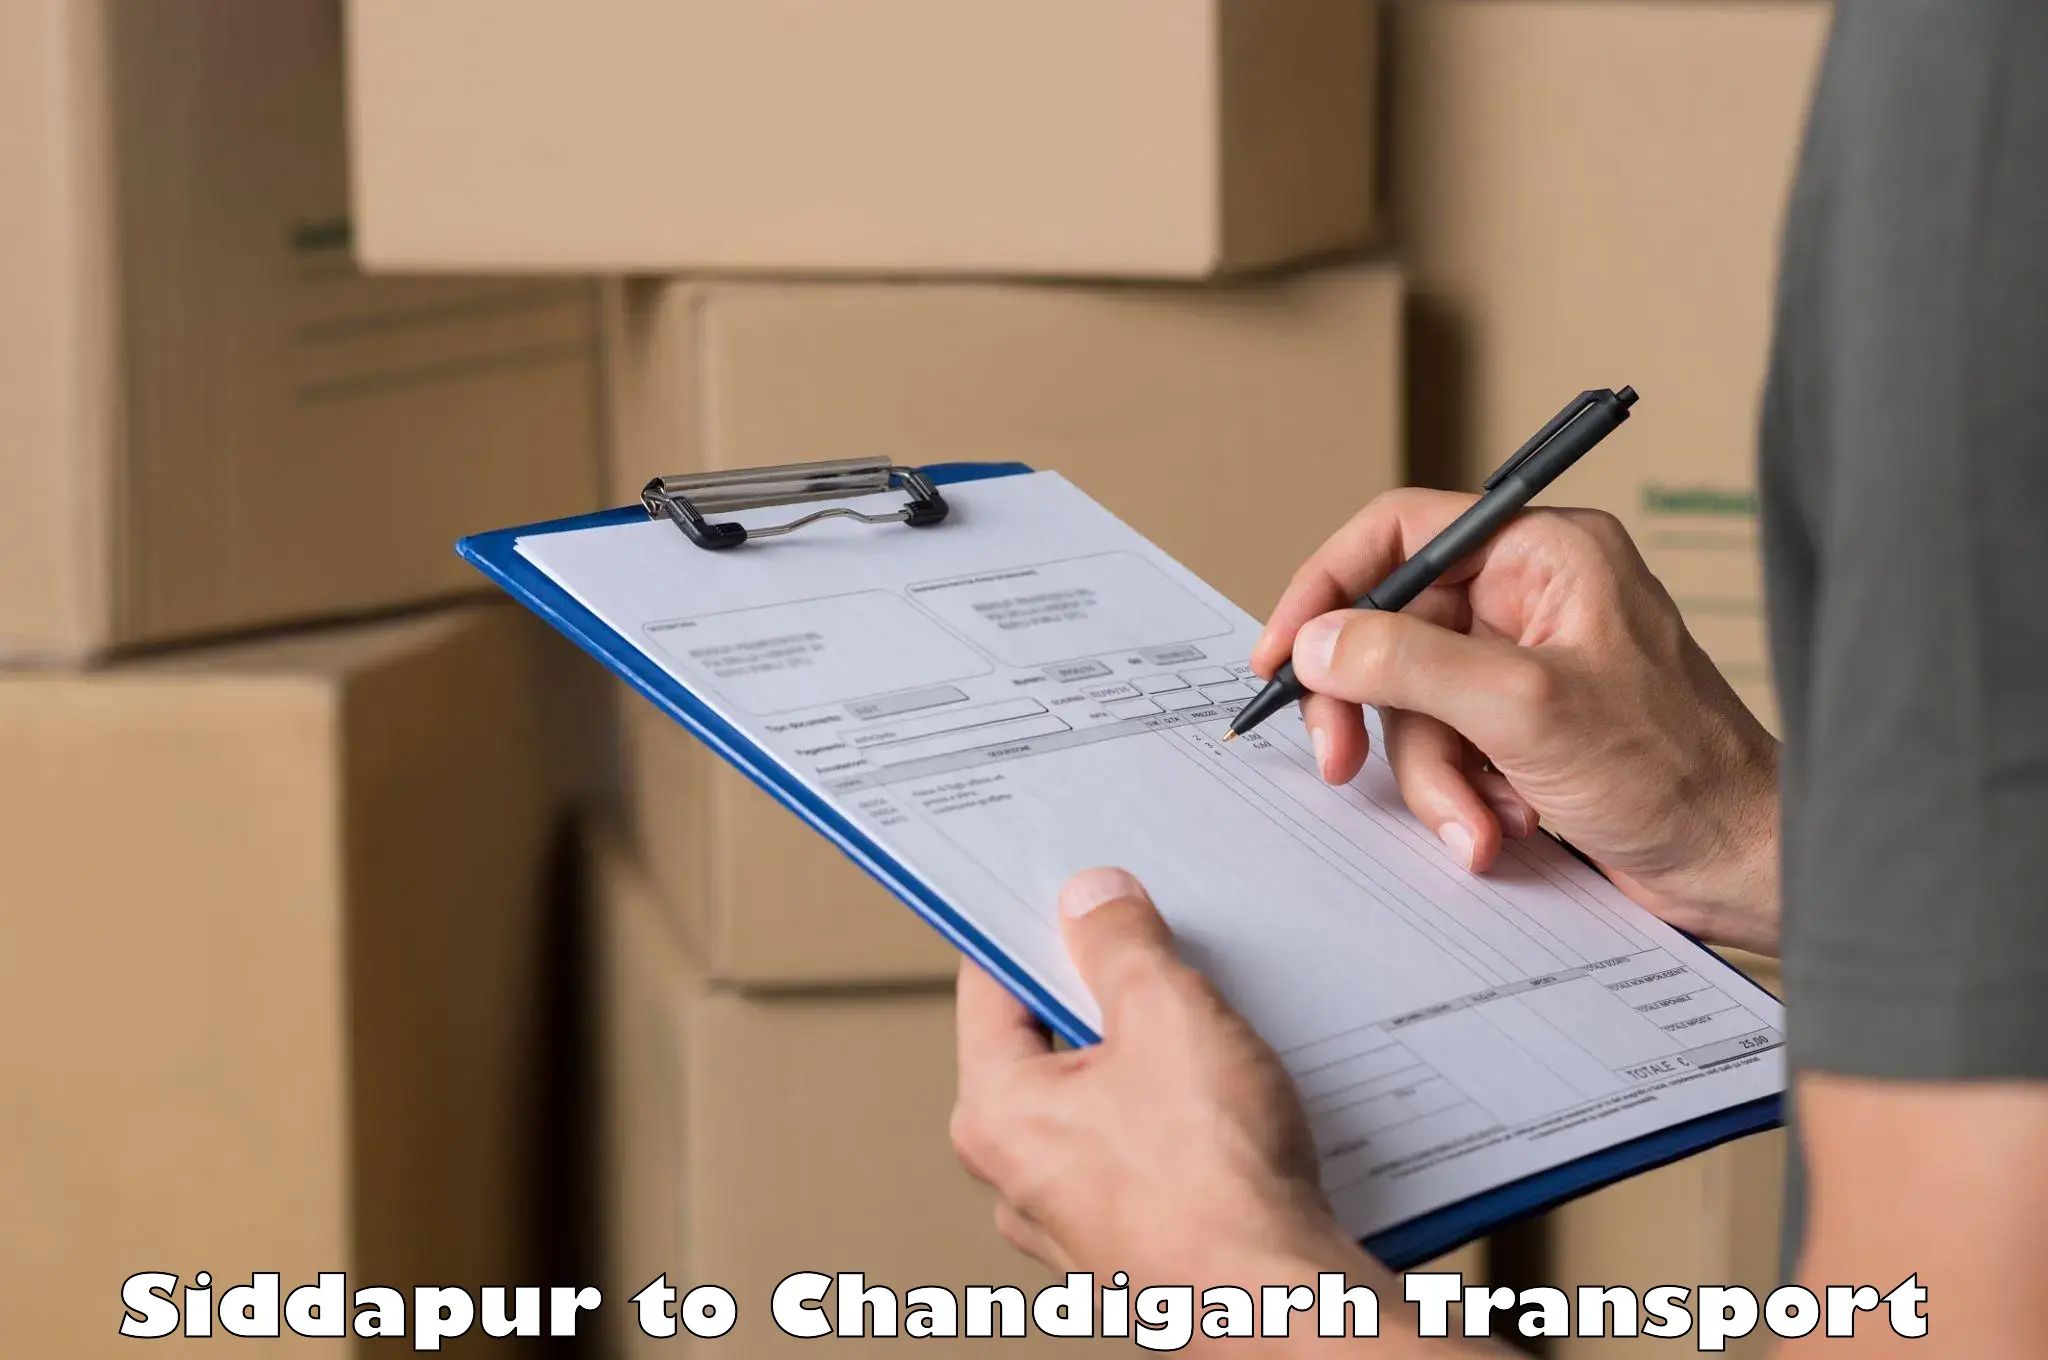 Daily transport service Siddapur to Chandigarh